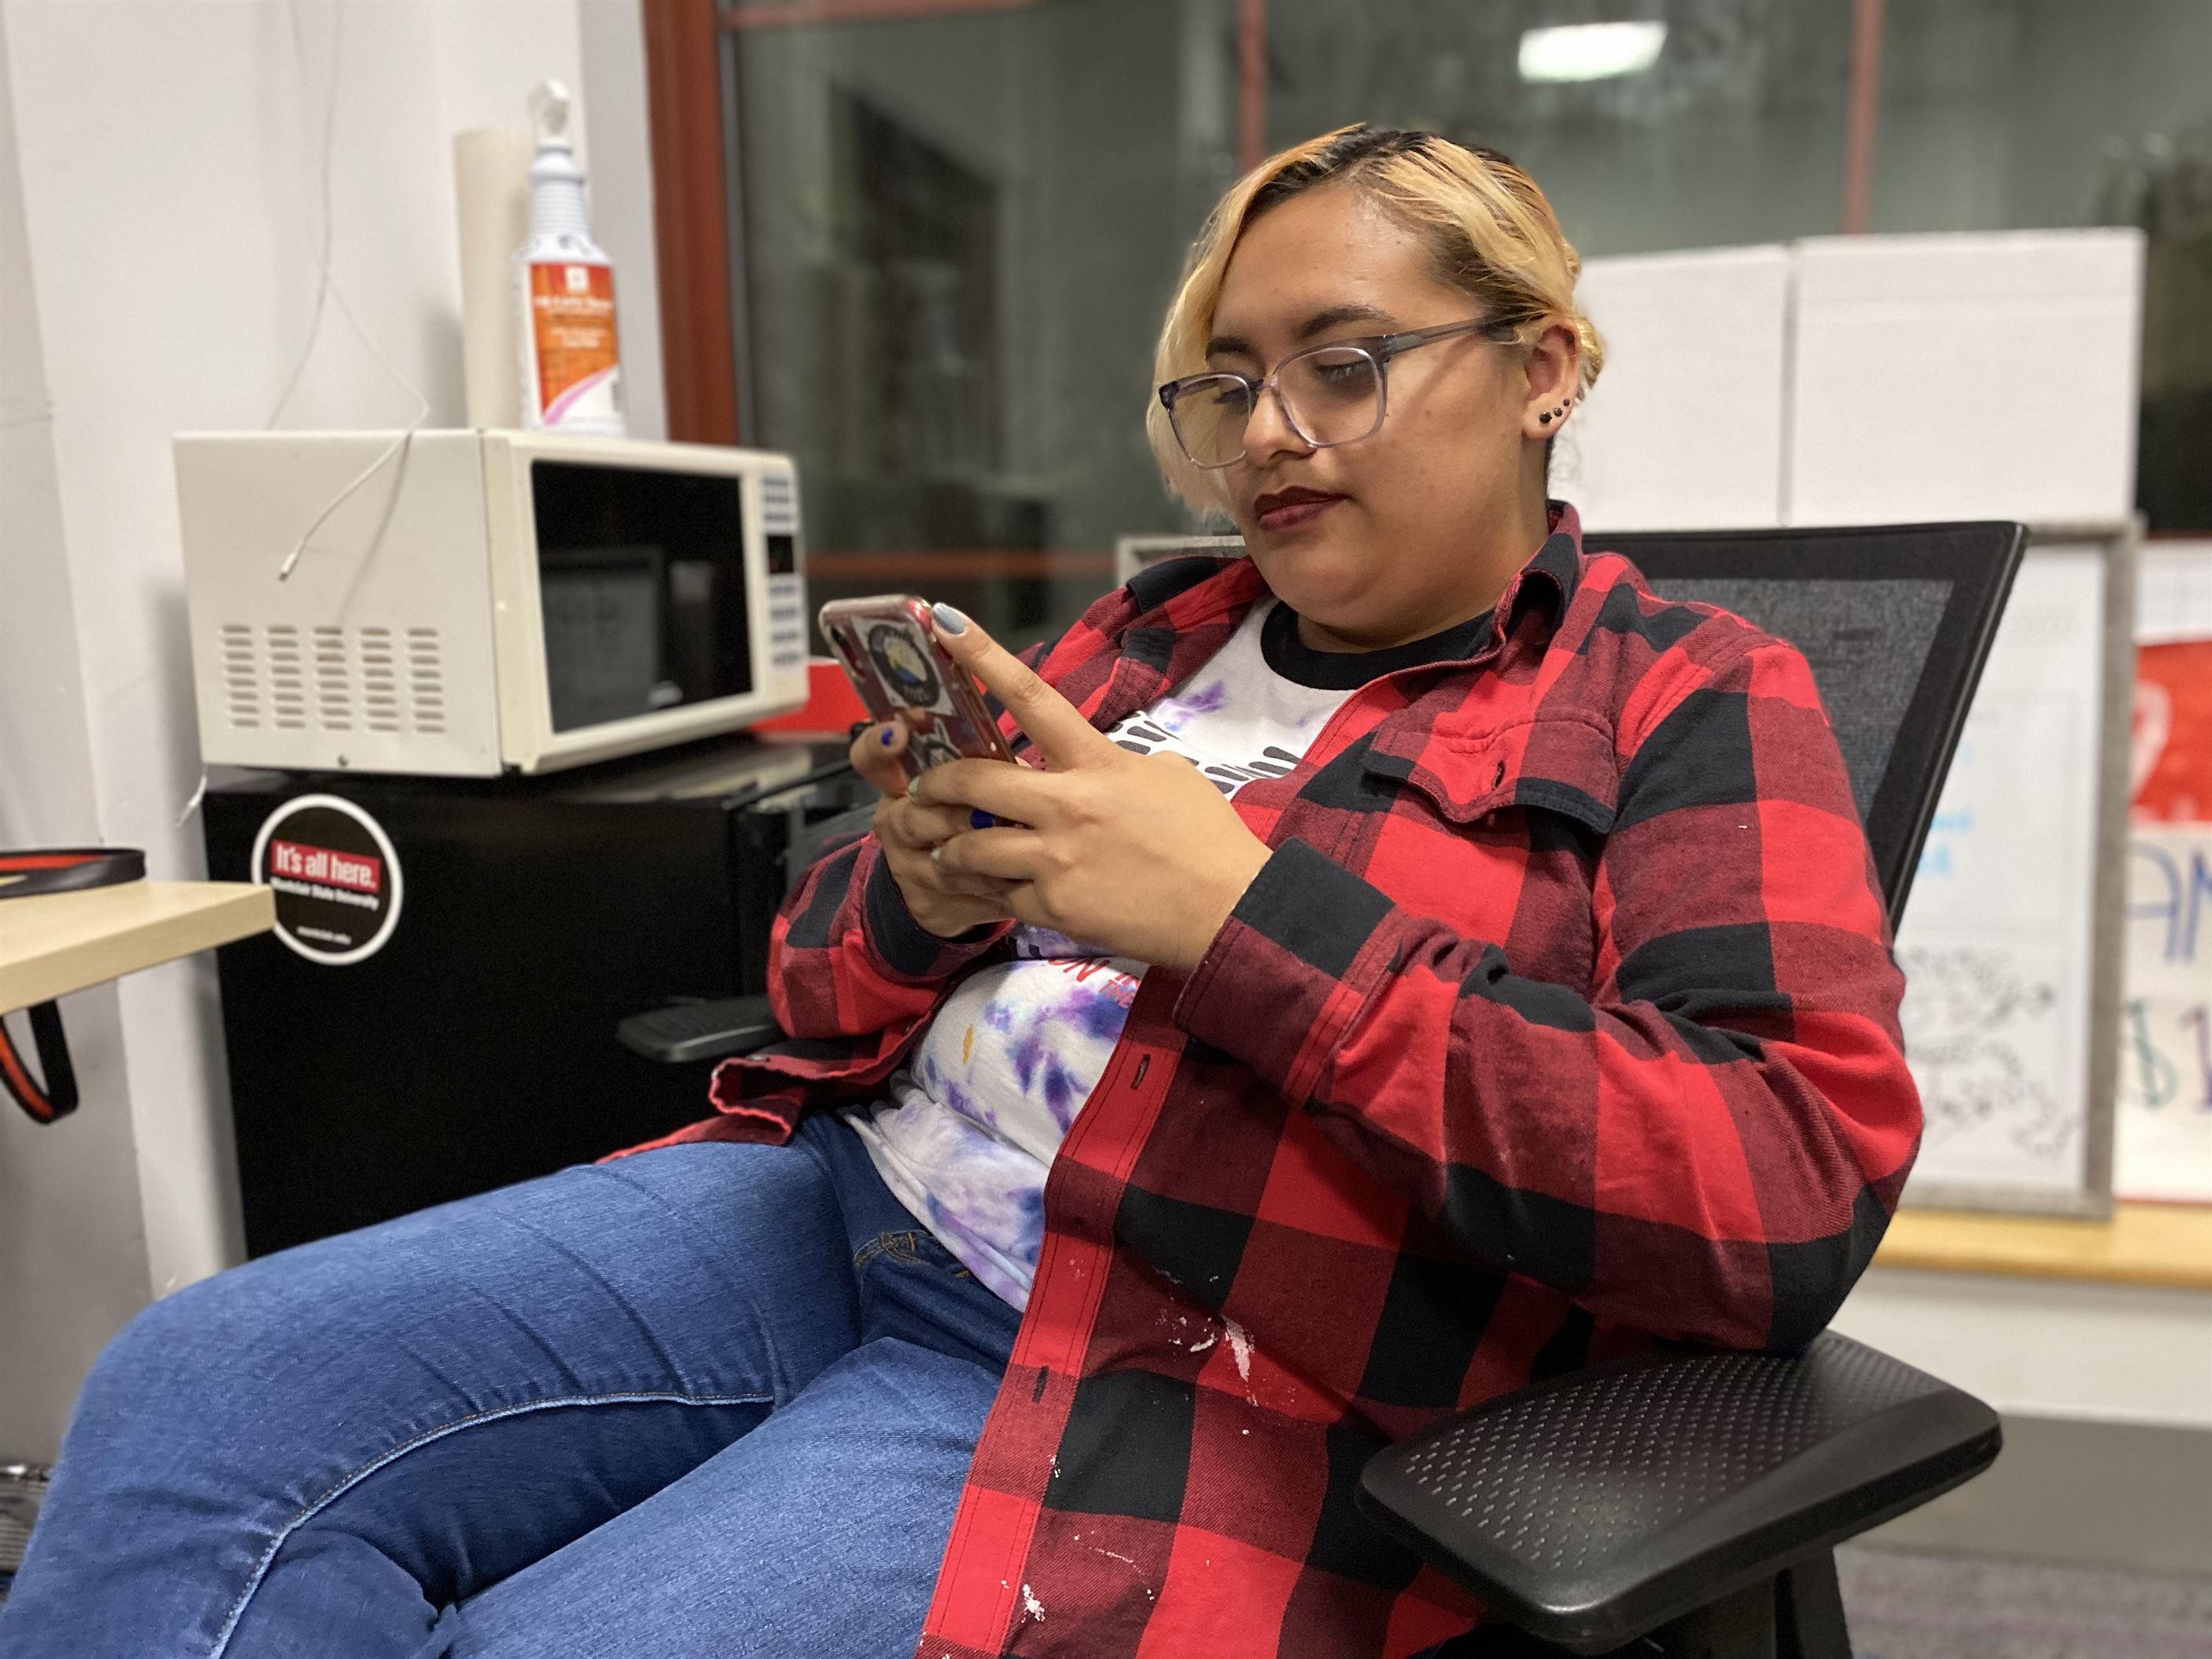 Mari Zuniga, a senior communication and media arts major, said that her use of social media during the pandemic benefited her mental health in some ways. Sal DiMaggio | The Montclarion